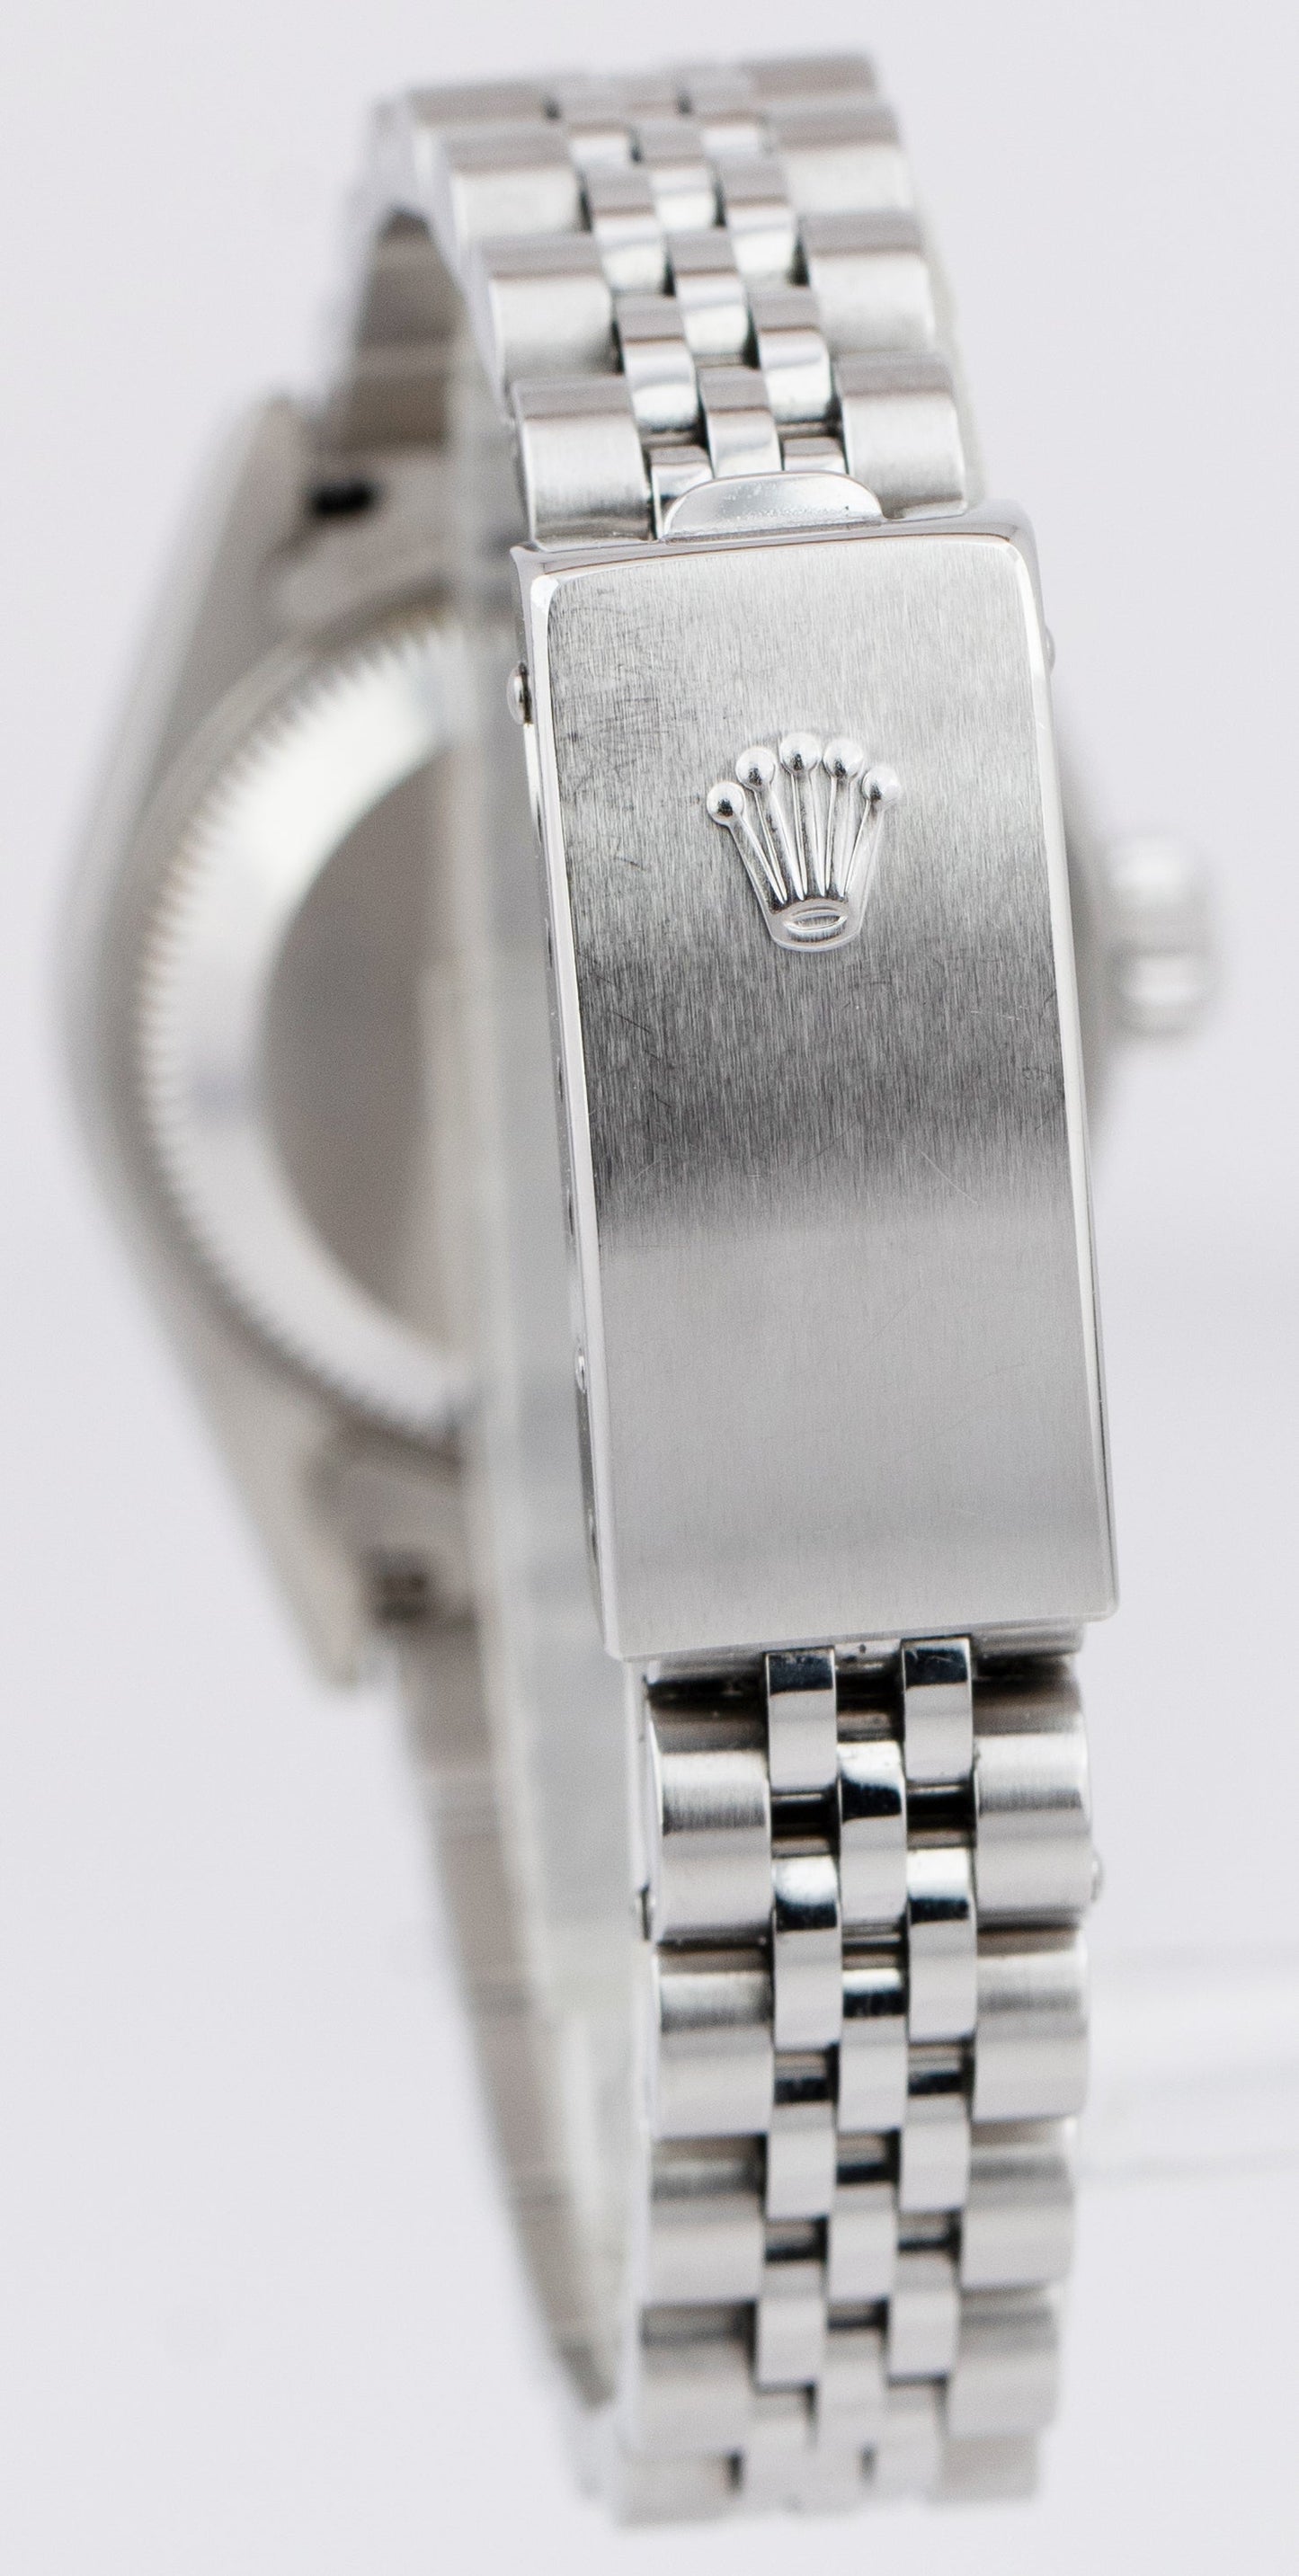 Ladies Rolex Oyster Perpetual Date 26mm Silver Engine-Turned Steel Watch 79240